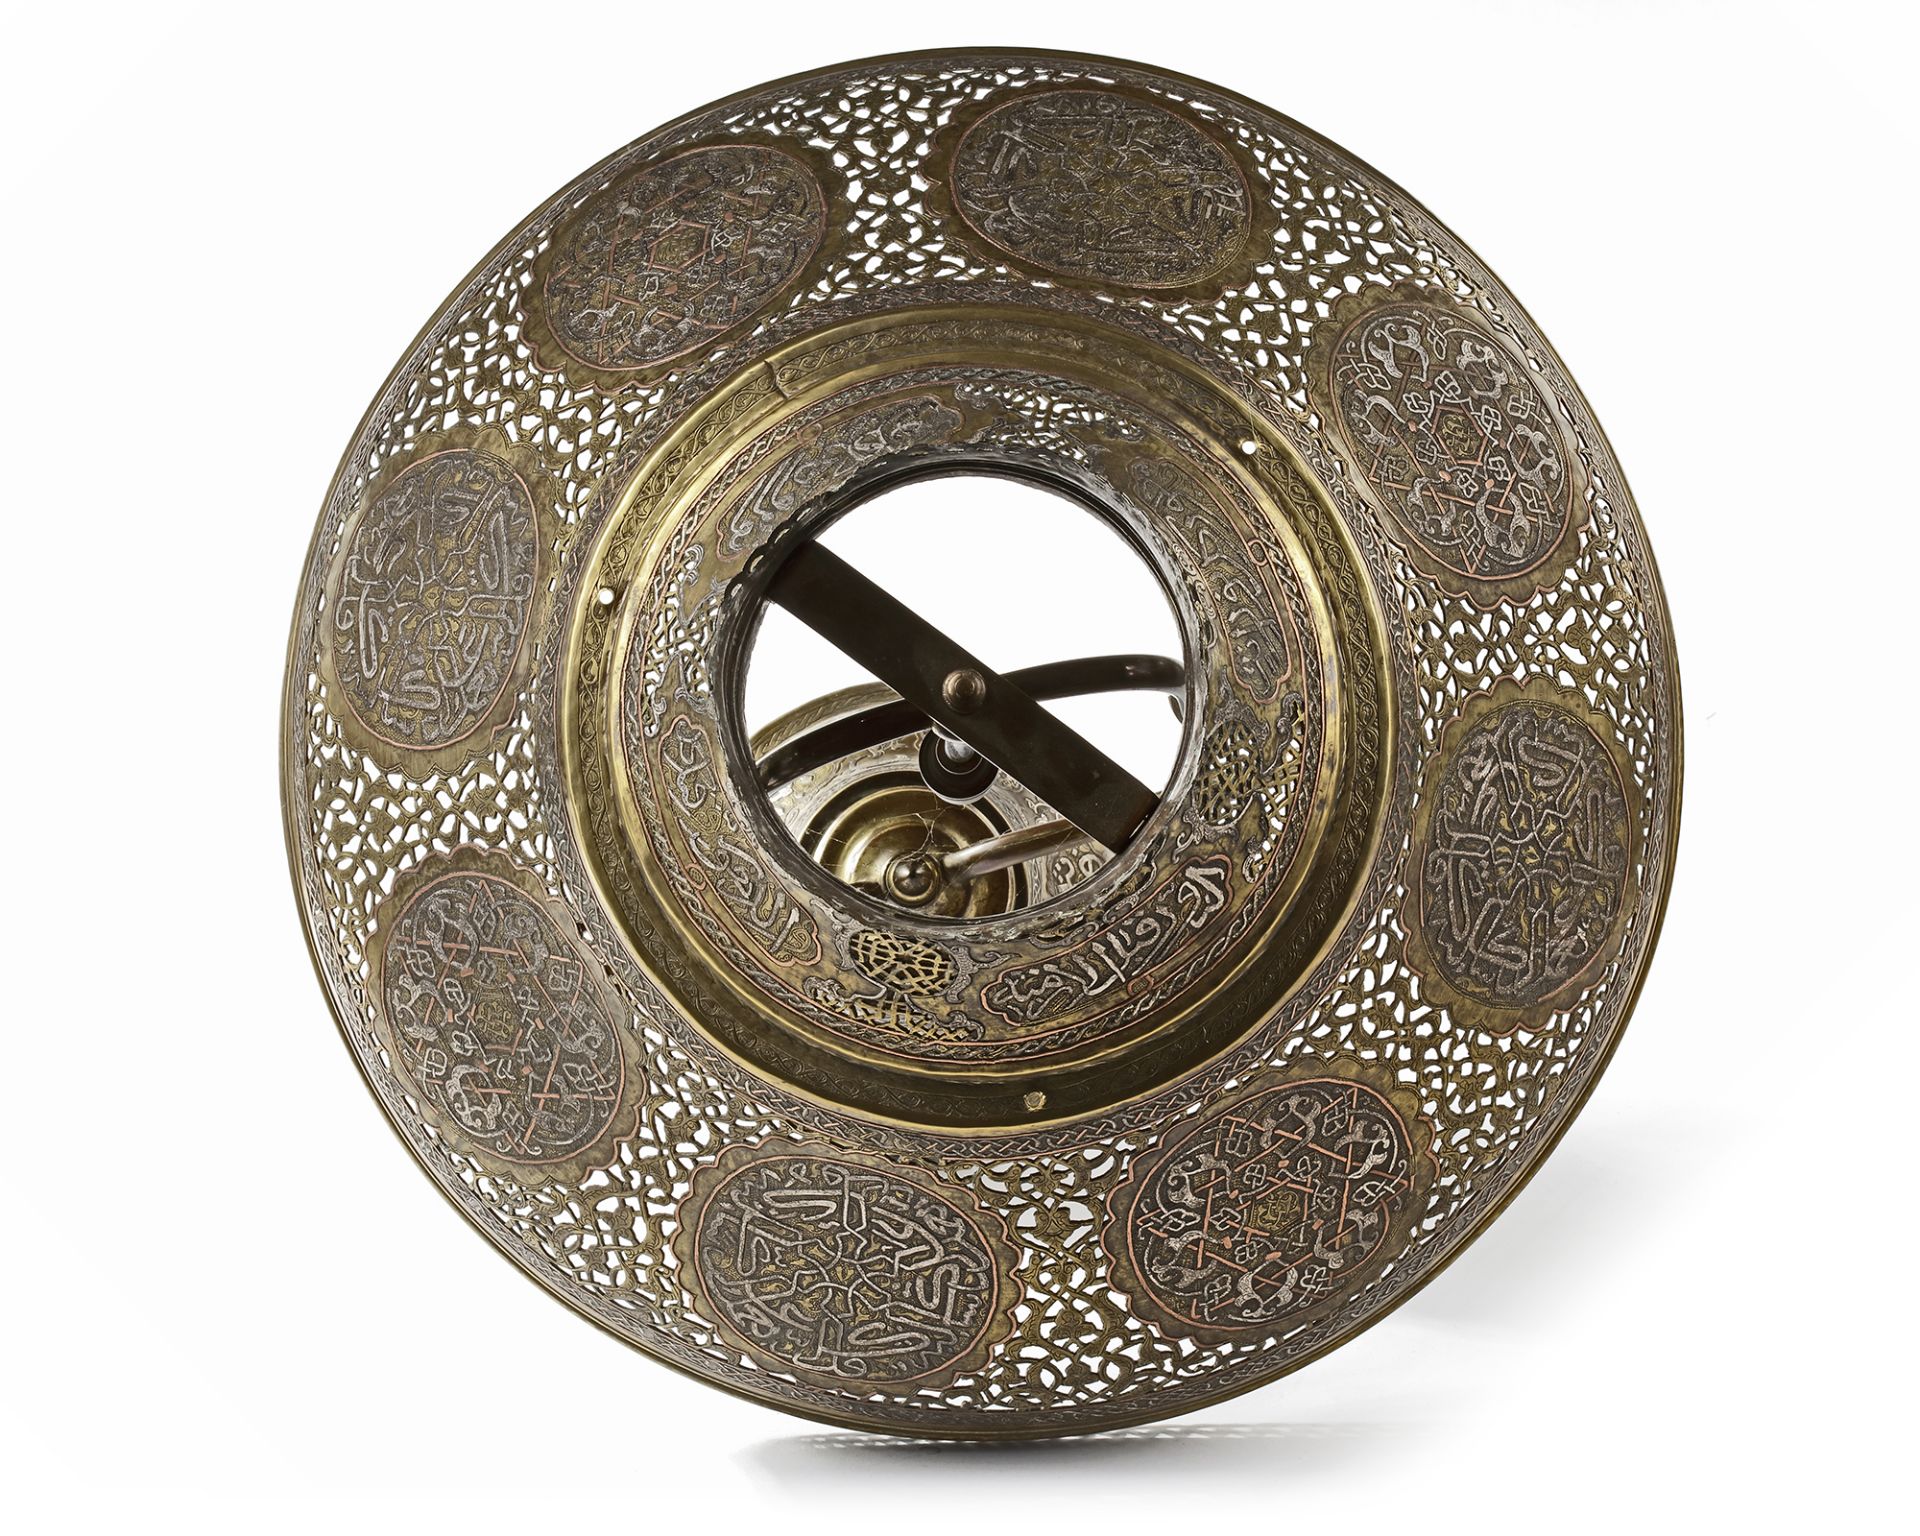 A LARGE ISLAMIC SILVER AND COPPER INLAID LAMP, 19TH CENTURY - Image 4 of 4